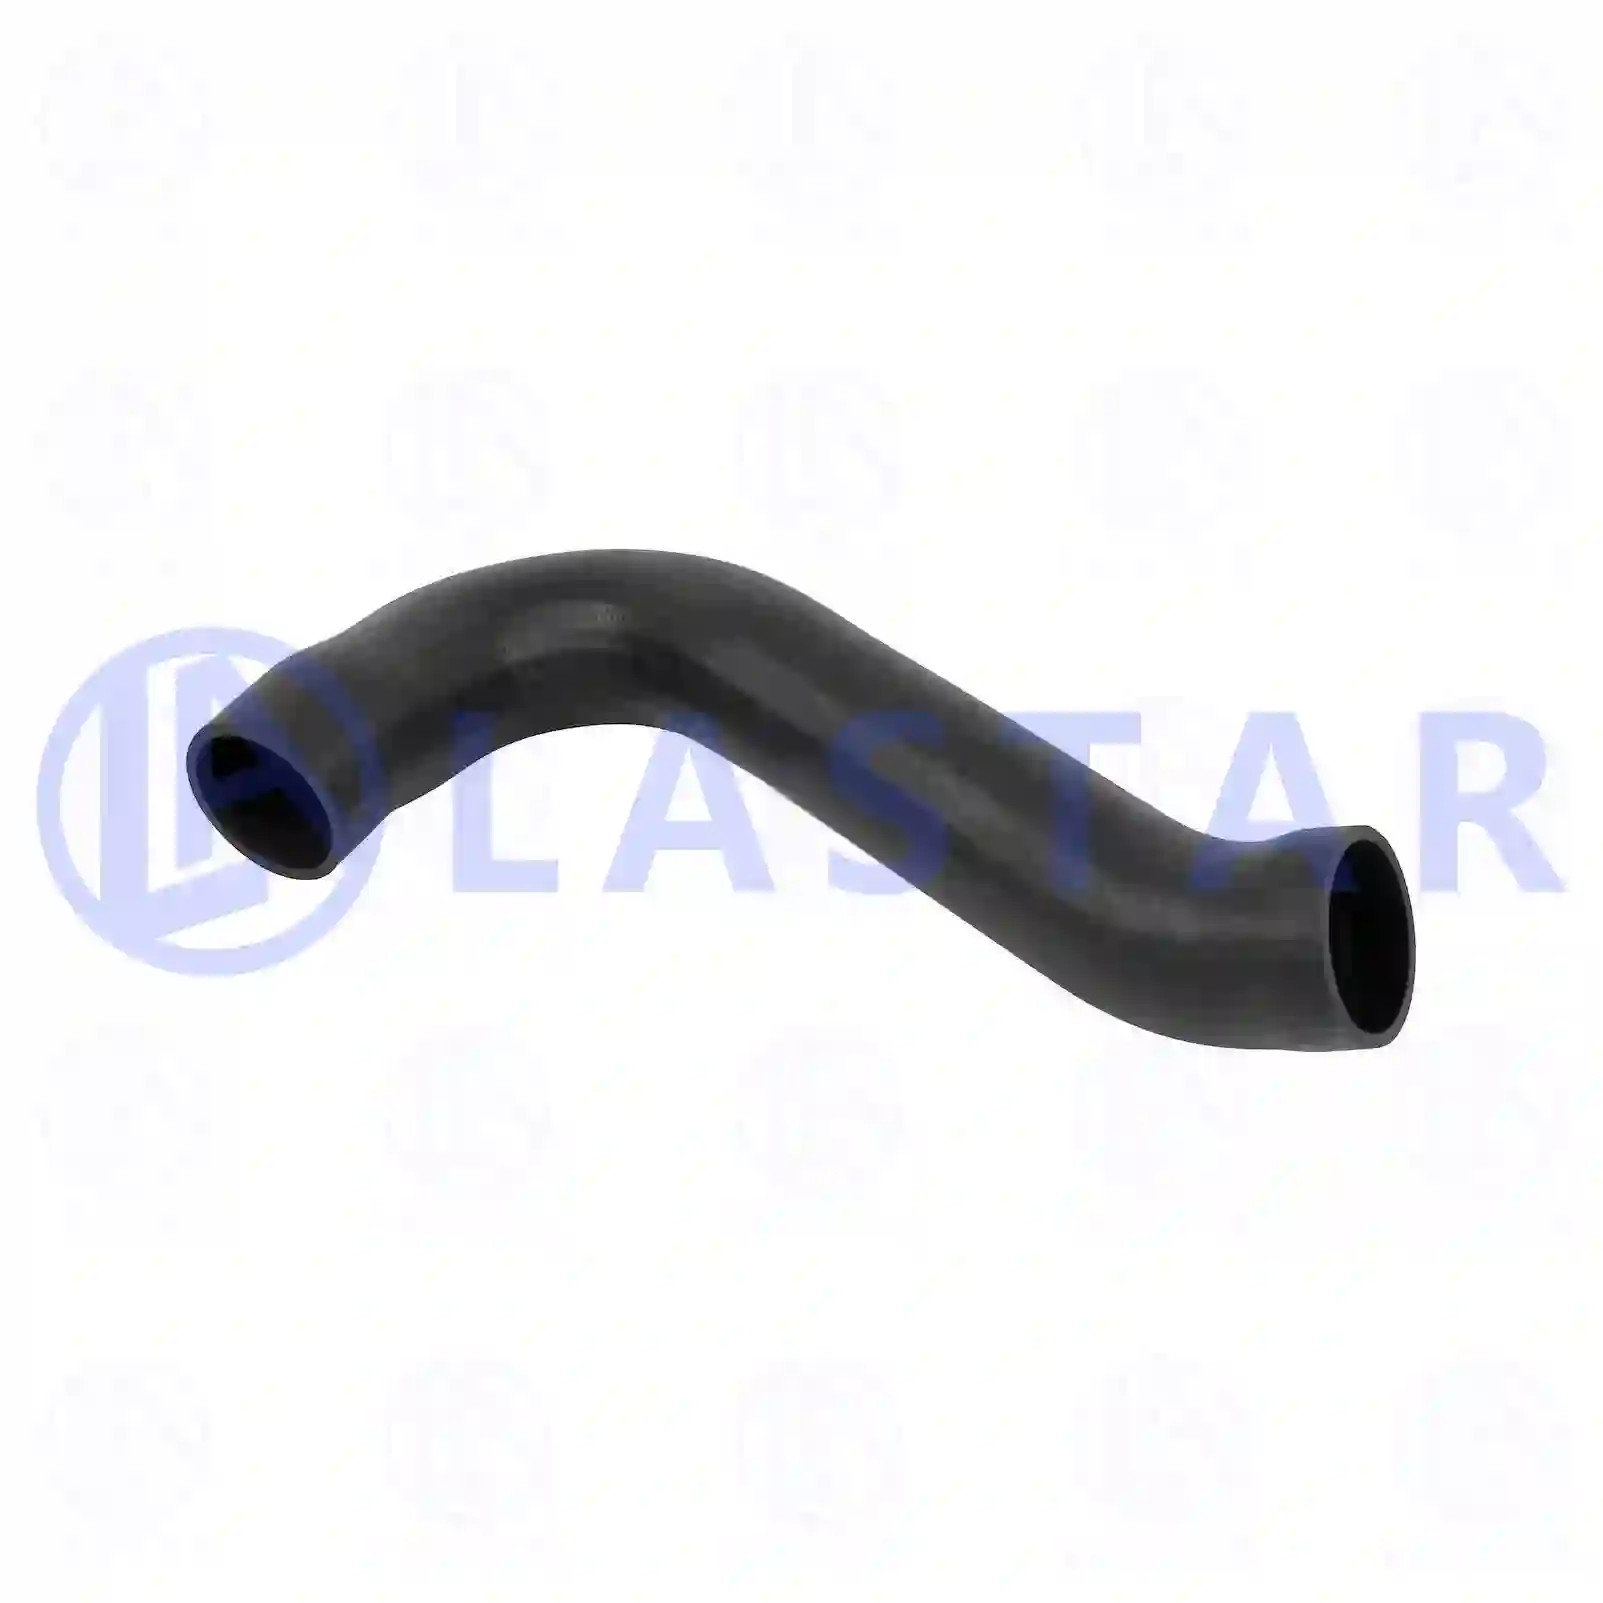 Charge air hose, 77708401, 9015282282 ||  77708401 Lastar Spare Part | Truck Spare Parts, Auotomotive Spare Parts Charge air hose, 77708401, 9015282282 ||  77708401 Lastar Spare Part | Truck Spare Parts, Auotomotive Spare Parts